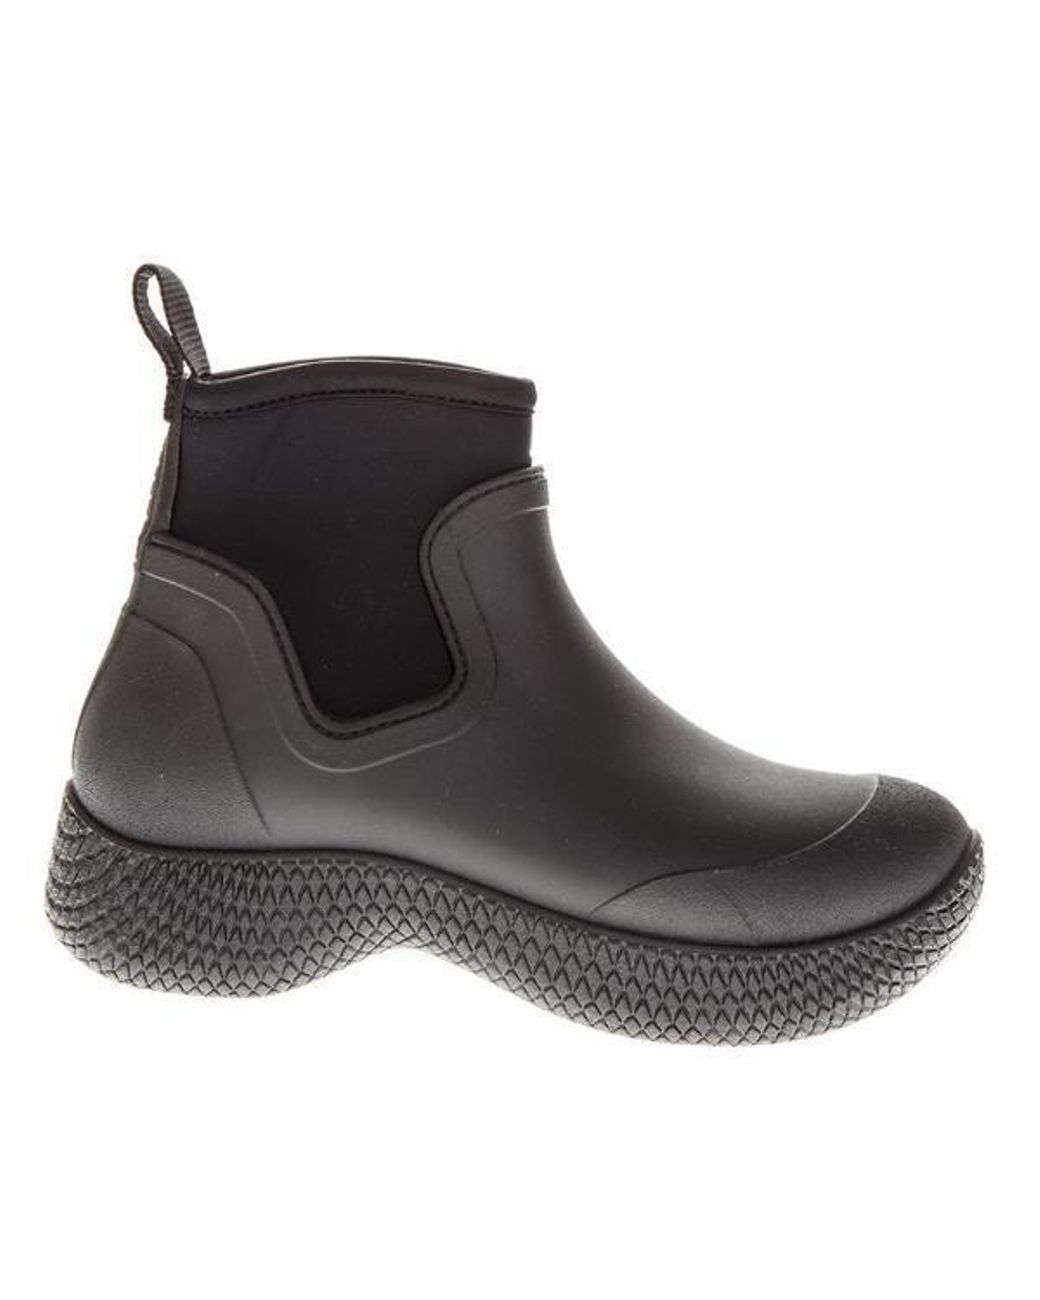 Celine Outdoor Ankle Boots in Black | Lyst